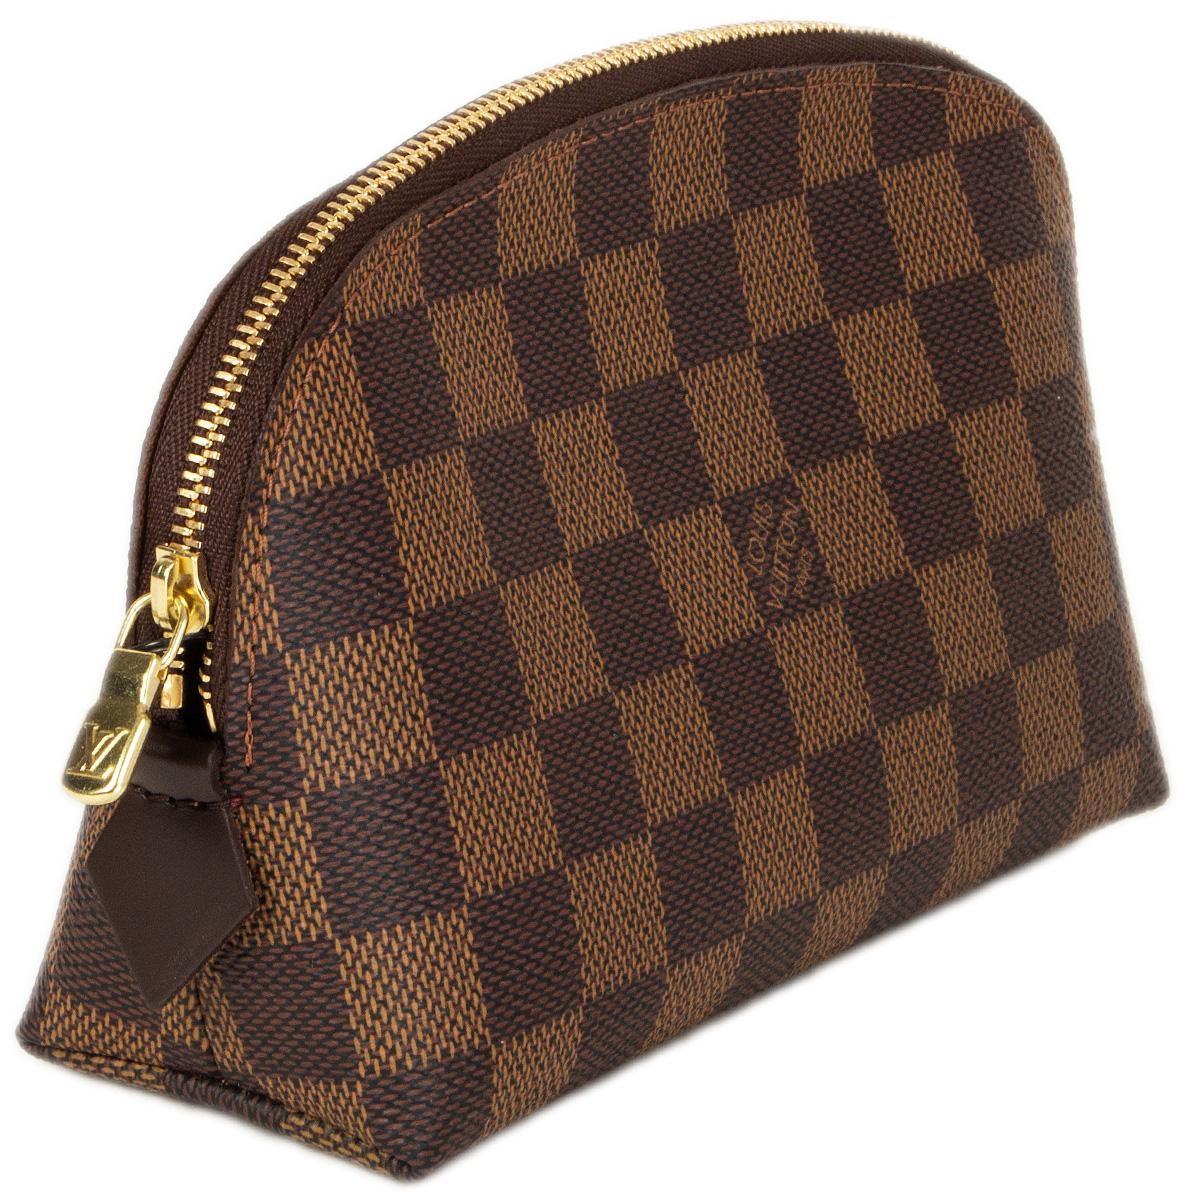 100% authentic Louis Vuitton cosmetic pouch in Damier Ebene canvas with sumptuous leather trimmings, and gold brass detail. Lined in red coated canvas with one slit pocket. Has been carried once and is in virtually new condition.